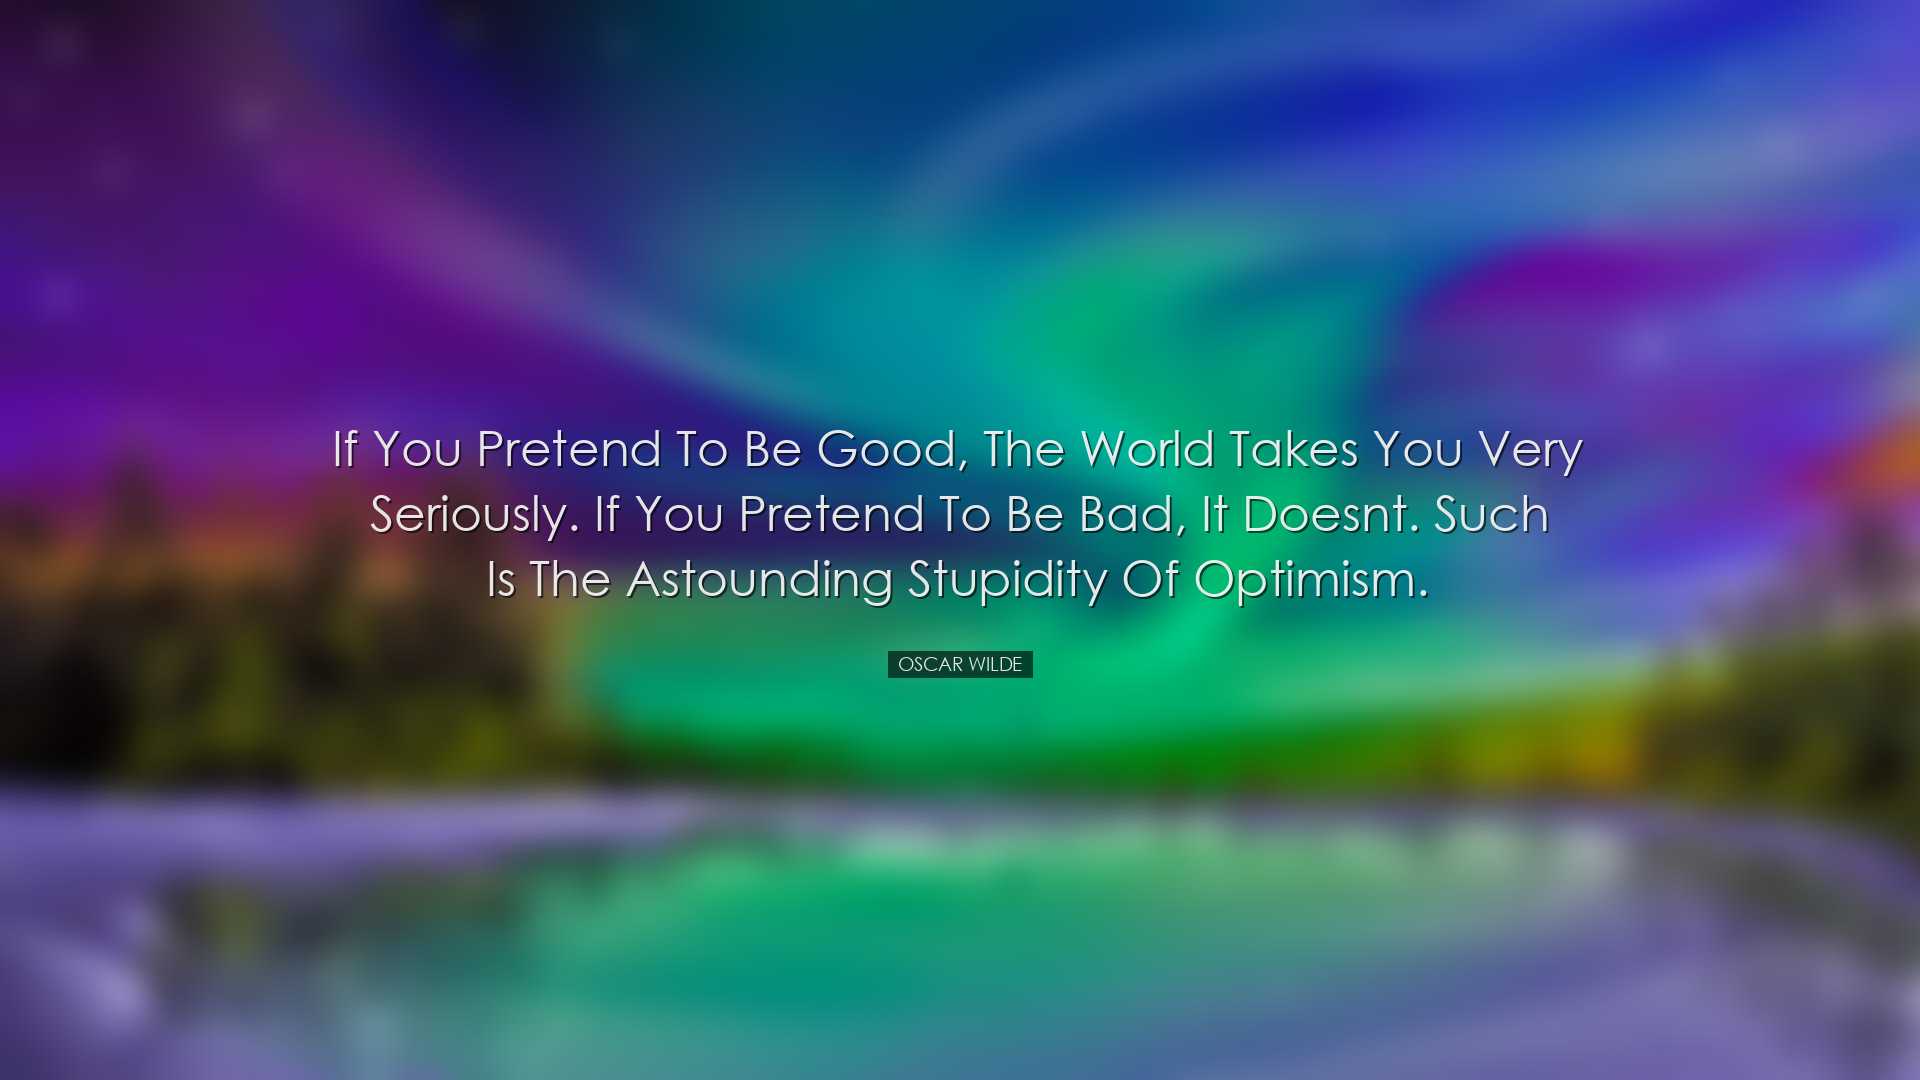 If you pretend to be good, the world takes you very seriously. If